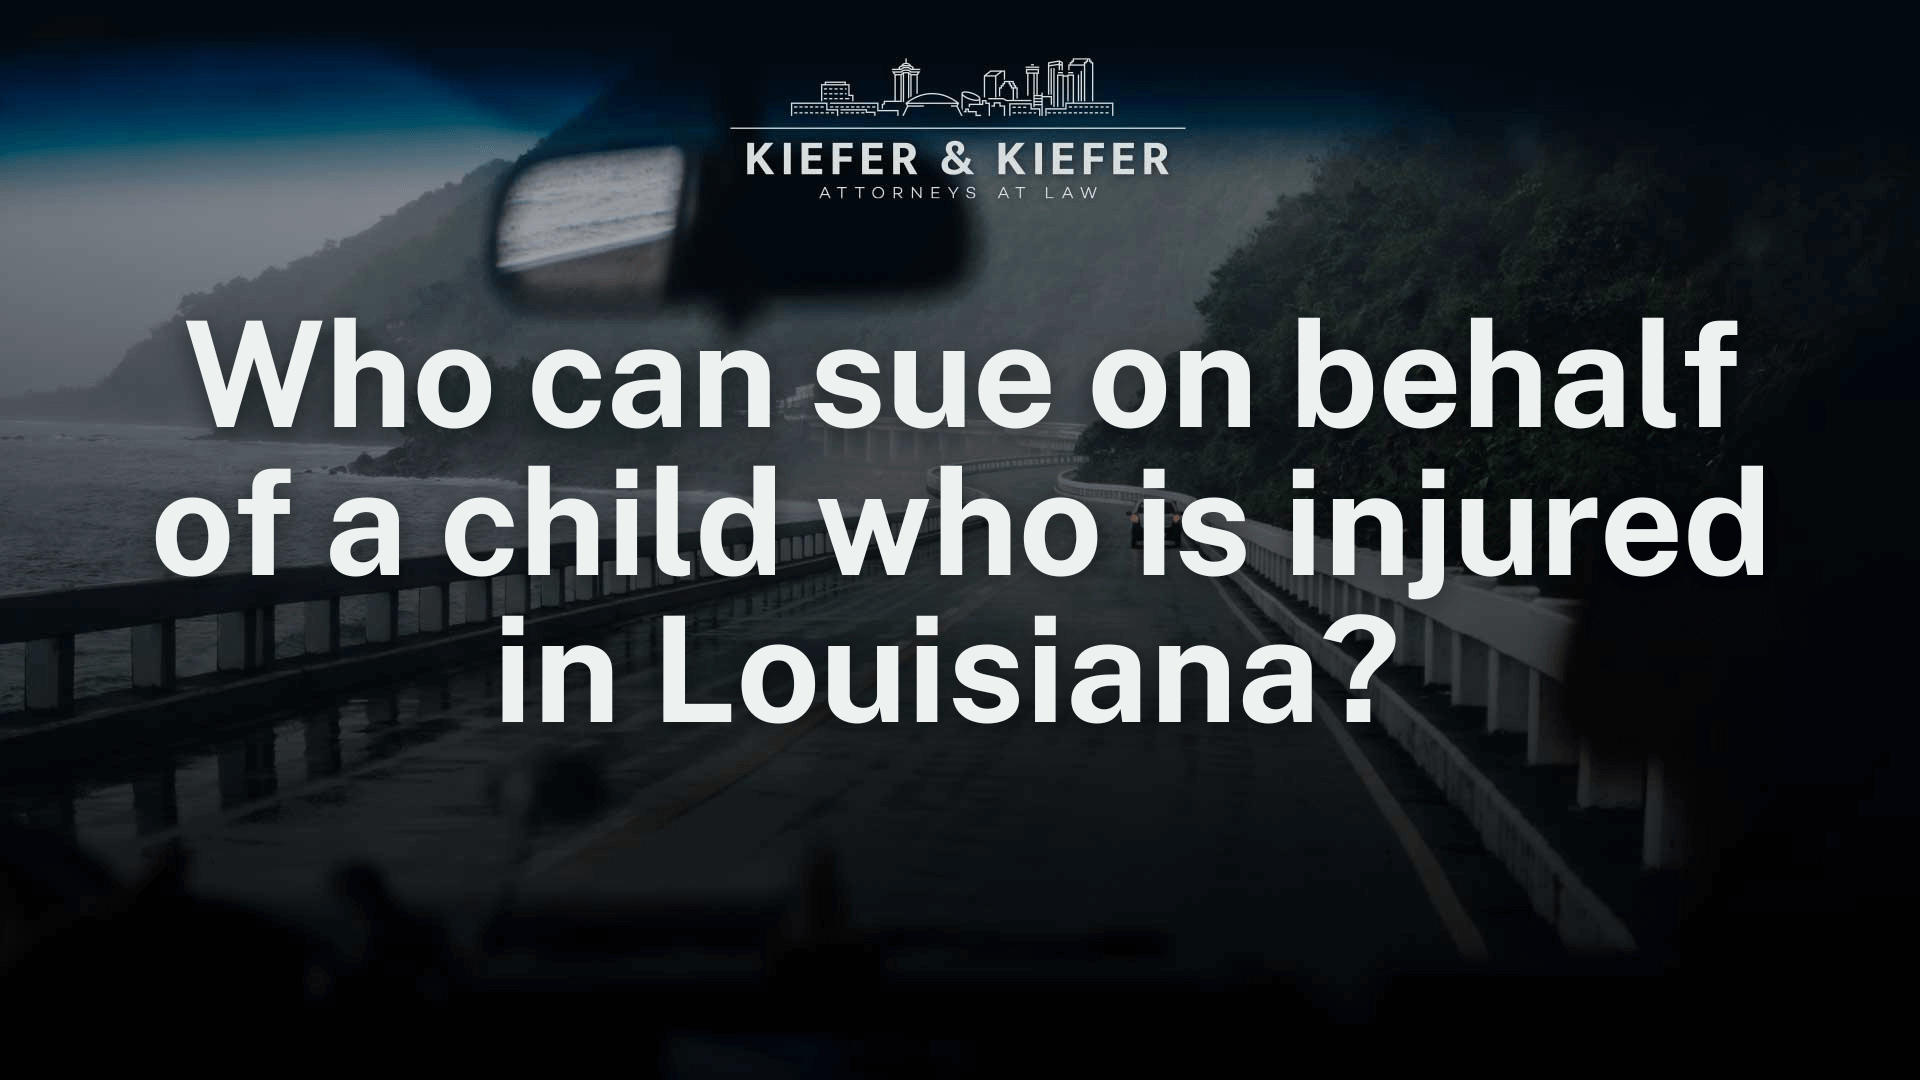 Who can sue on behalf of a child who is injured in Louisiana - Kiefer & Kiefer New Orleans Personal Injury Attorneys